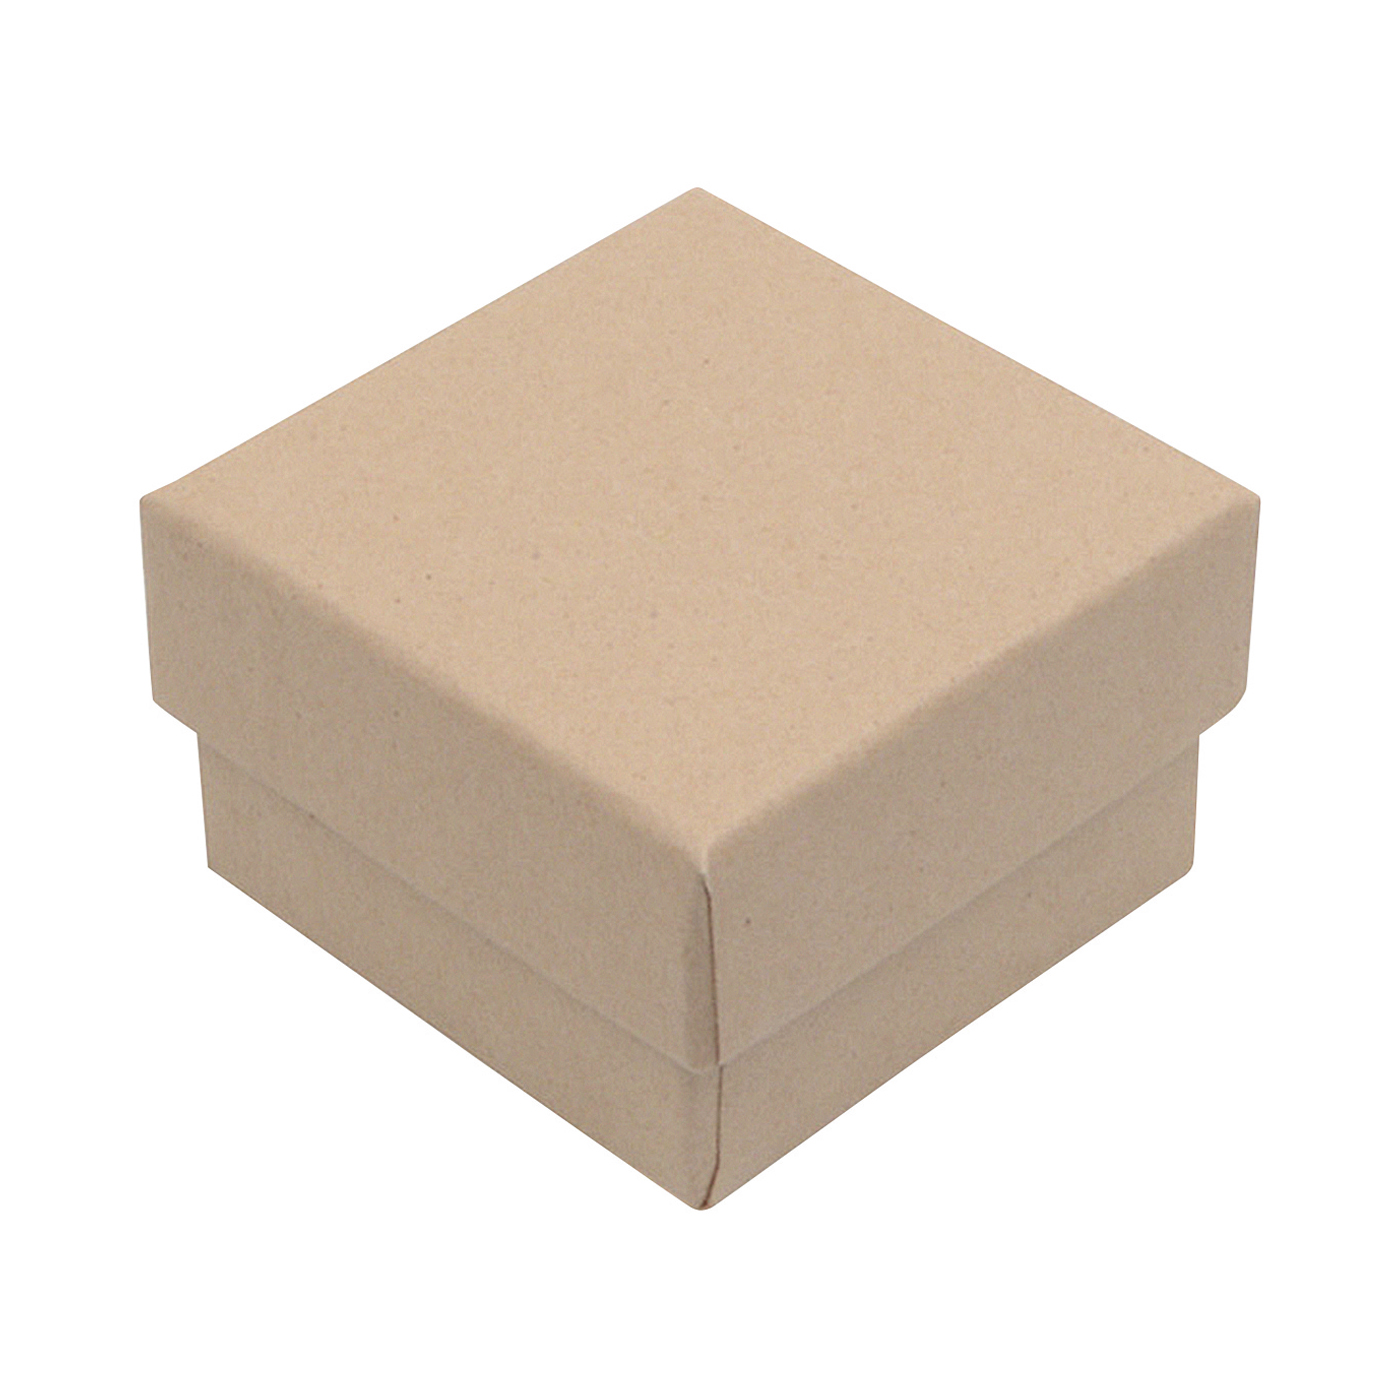 Jewellery Packaging "Eco", Natural, 50 x 50 x 32 mm - 1 piece